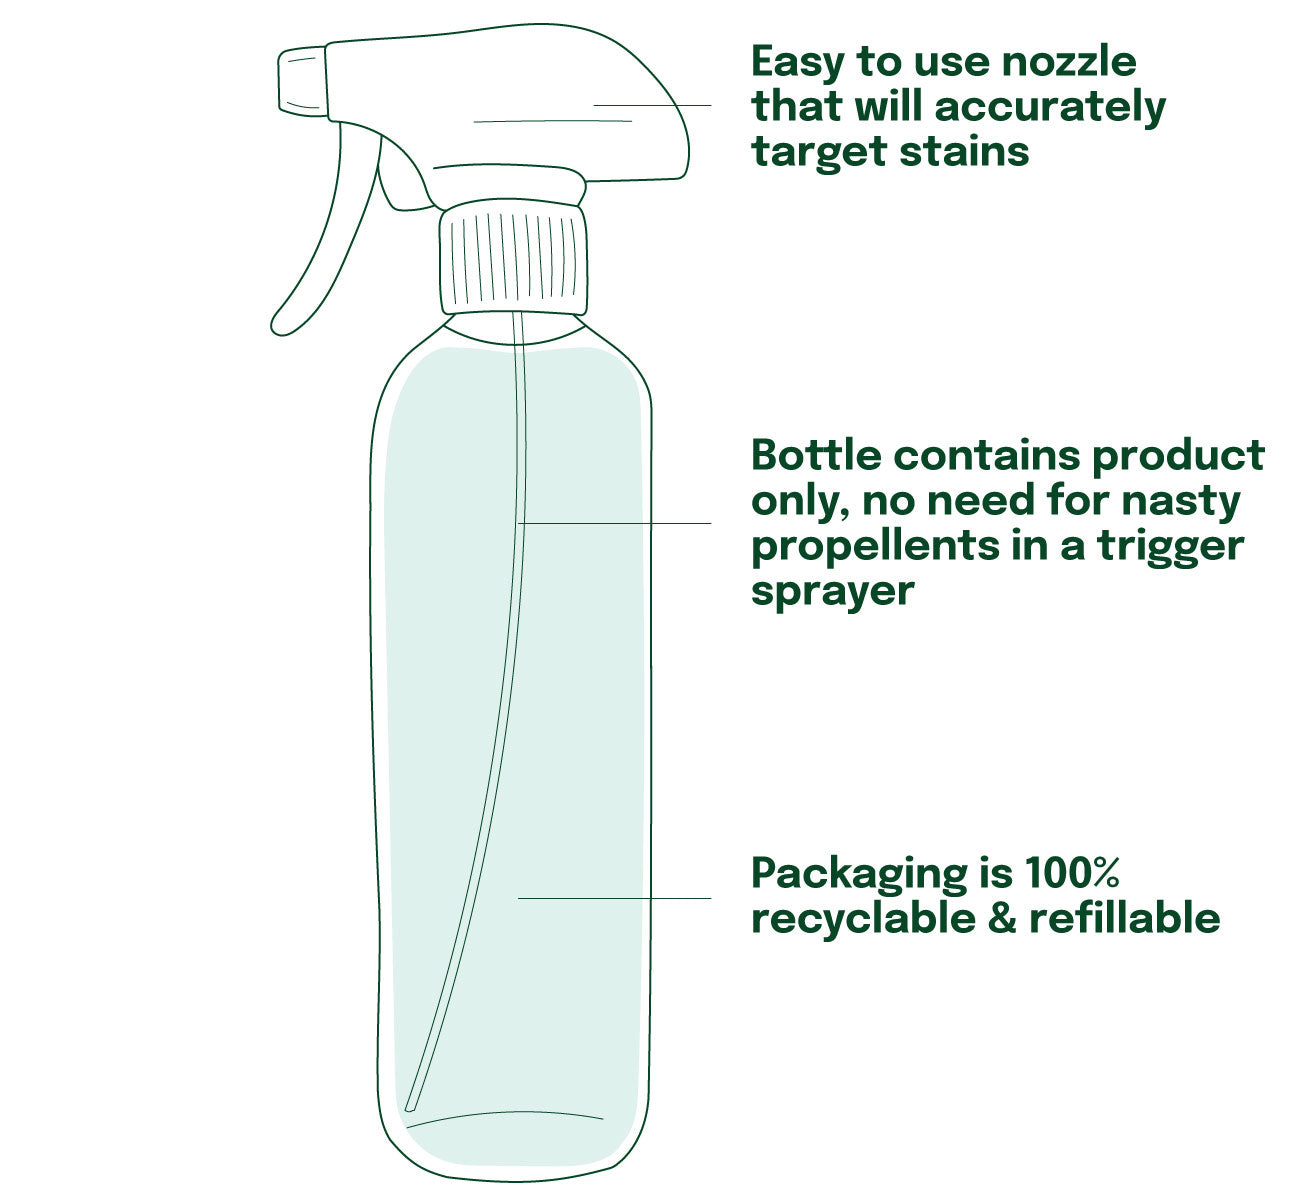 diagram of trigger sprayer bottles for stain removers, 100% recyclable and refillable